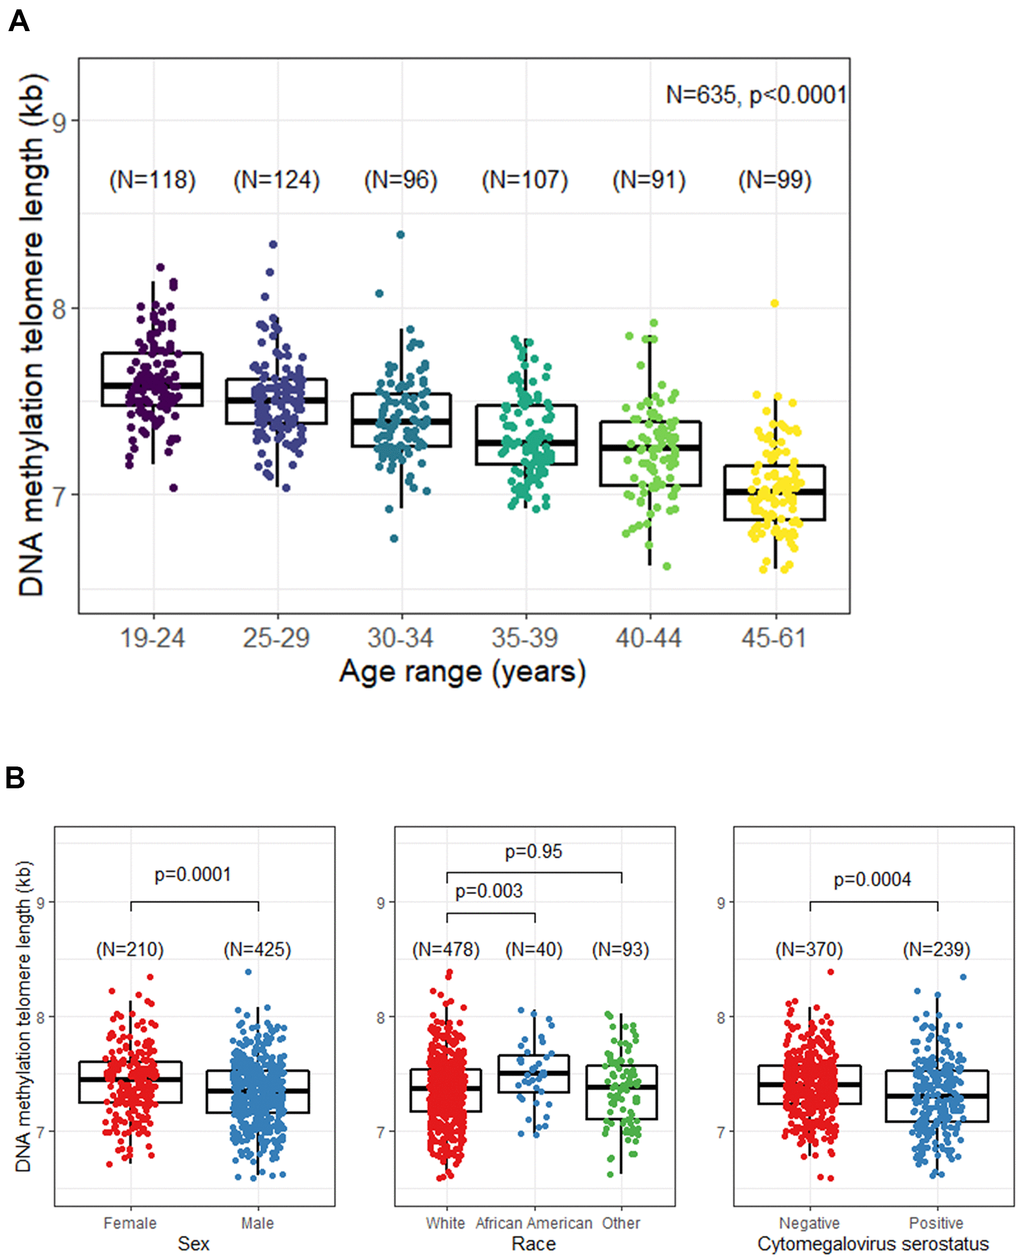 Unadjusted relationship between DNA methylation telomere length (DNAmTL) and selected participant characteristics. (A) DNAmTL by age categories. (B) DNAmTL by sex, race, or cytomegalovirus (CMV) serostatus.